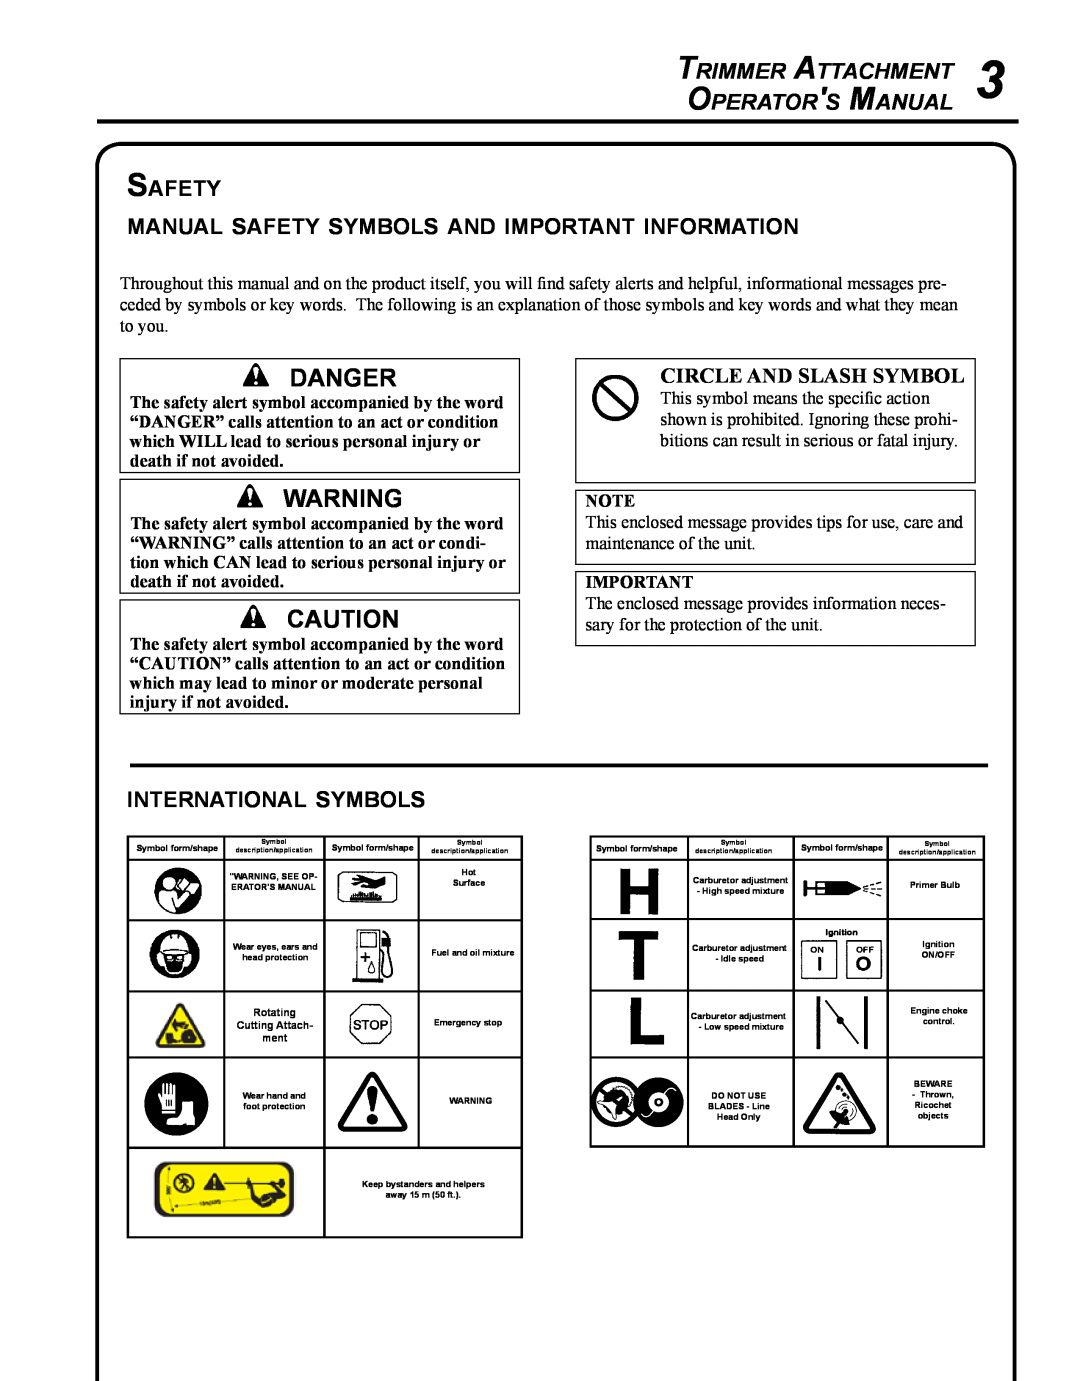 Echo 99944200540 Danger, Trimmer Attachment Operators Manual, Safety manual safety symbols and important information 